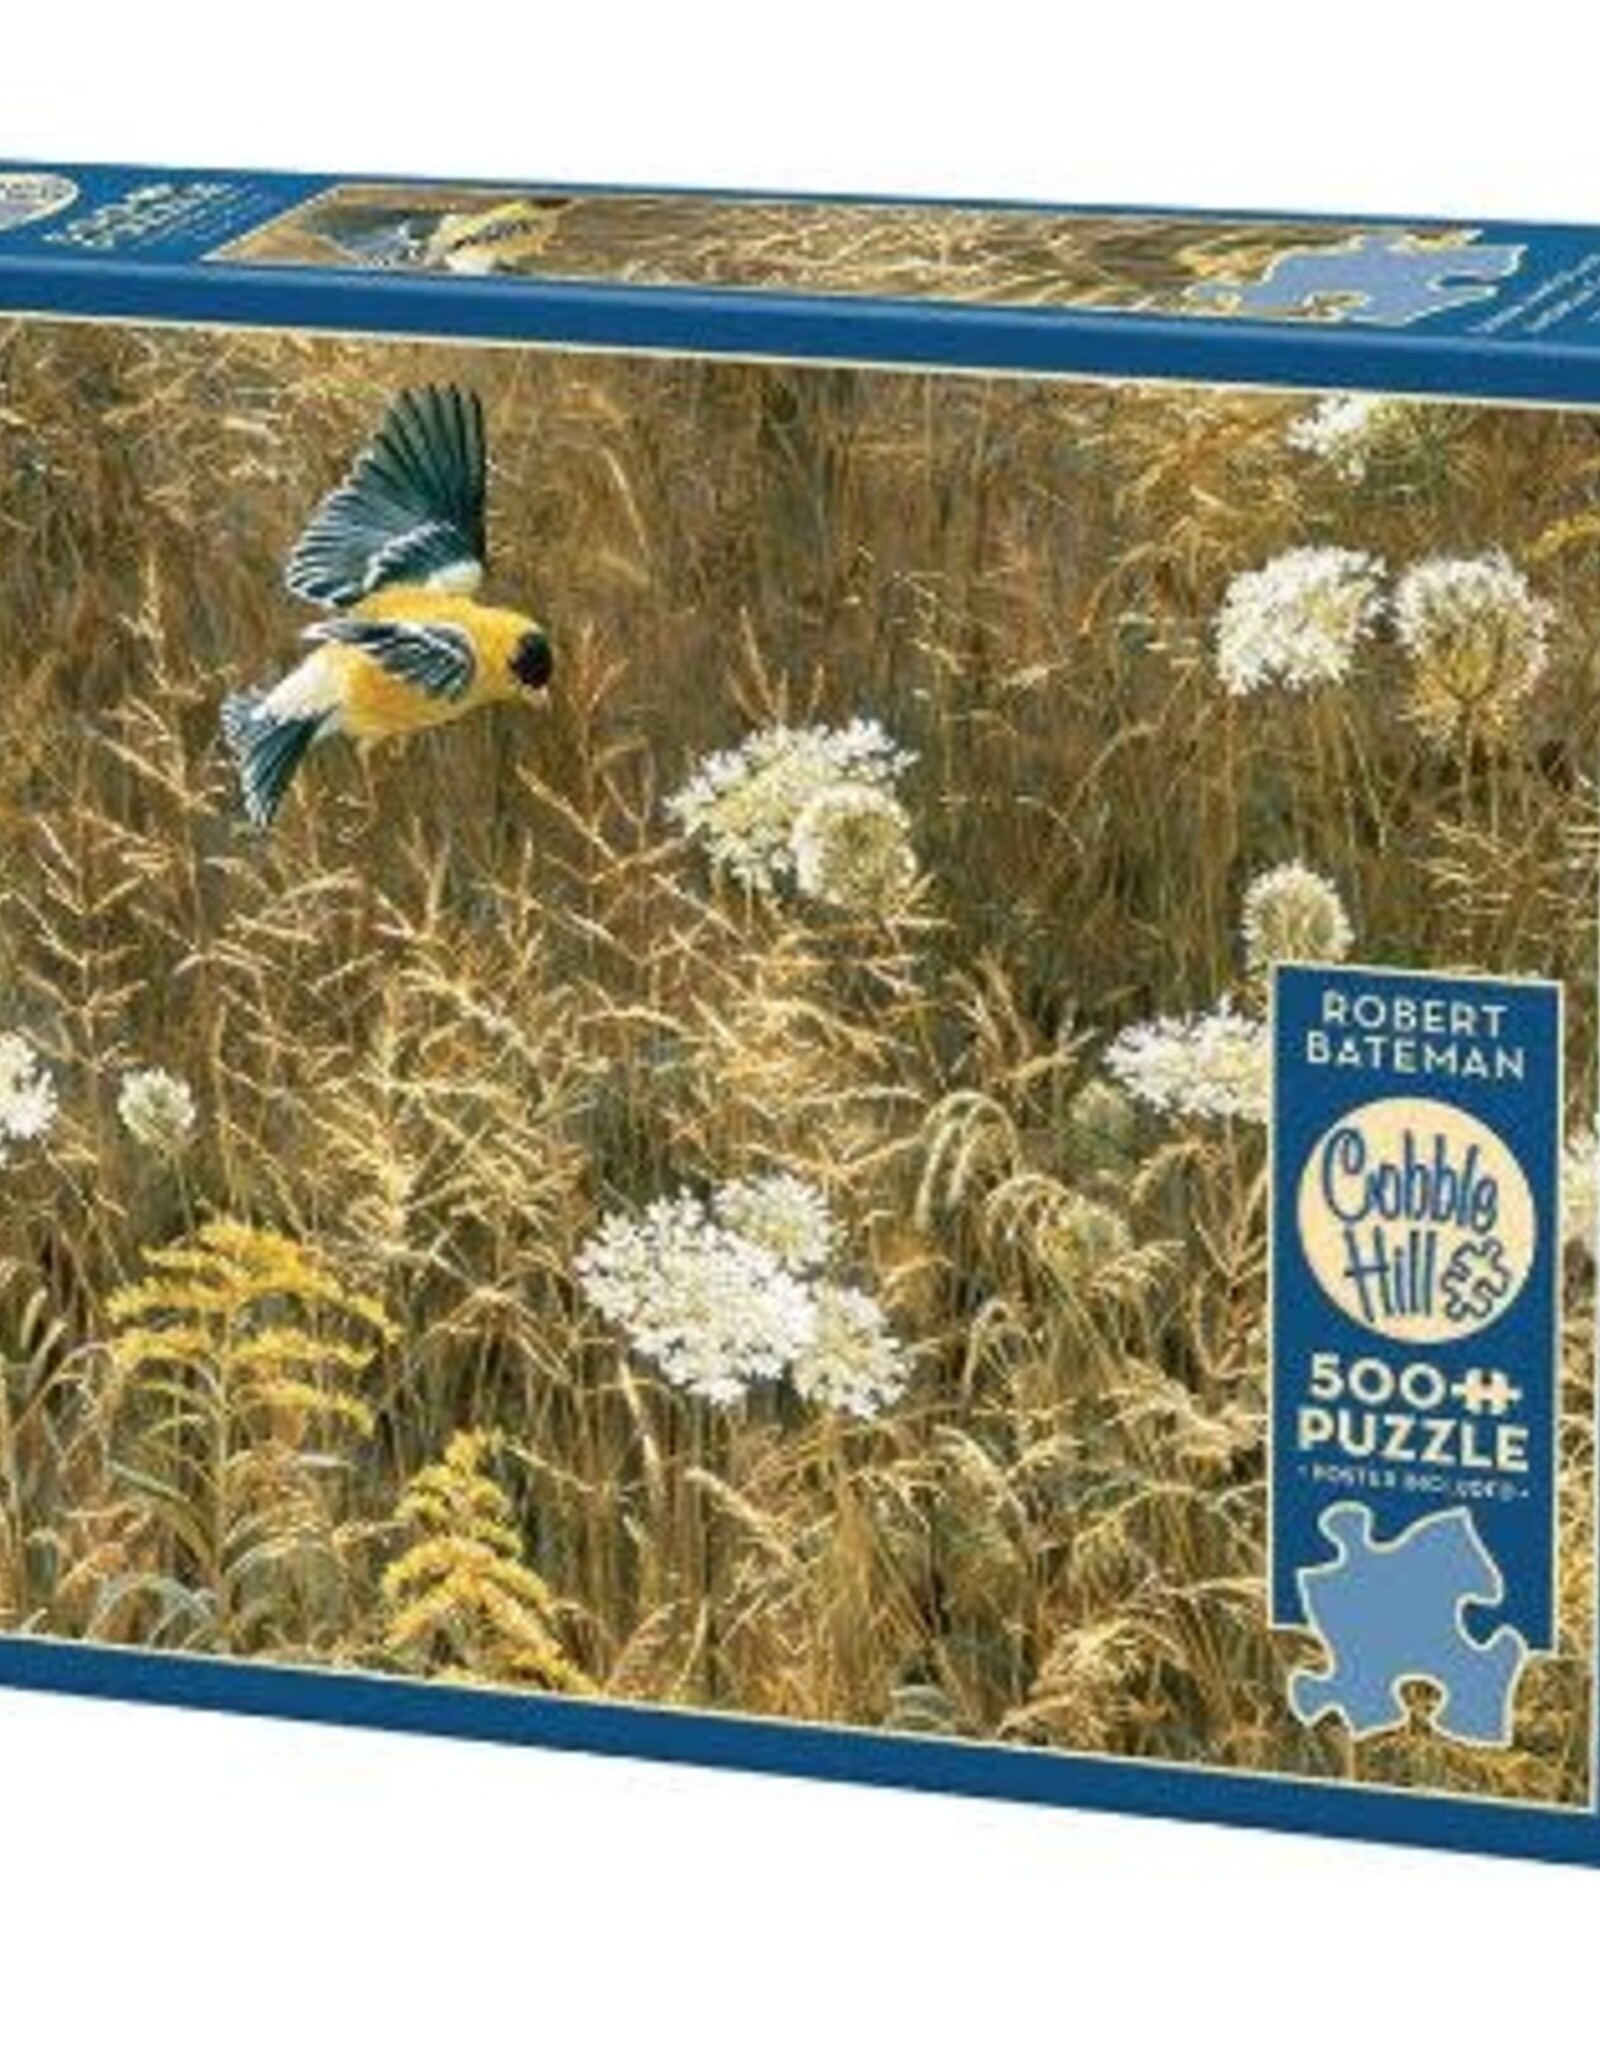 Cobble Hill Queen Anne's Lace and American Goldfinch 500pc